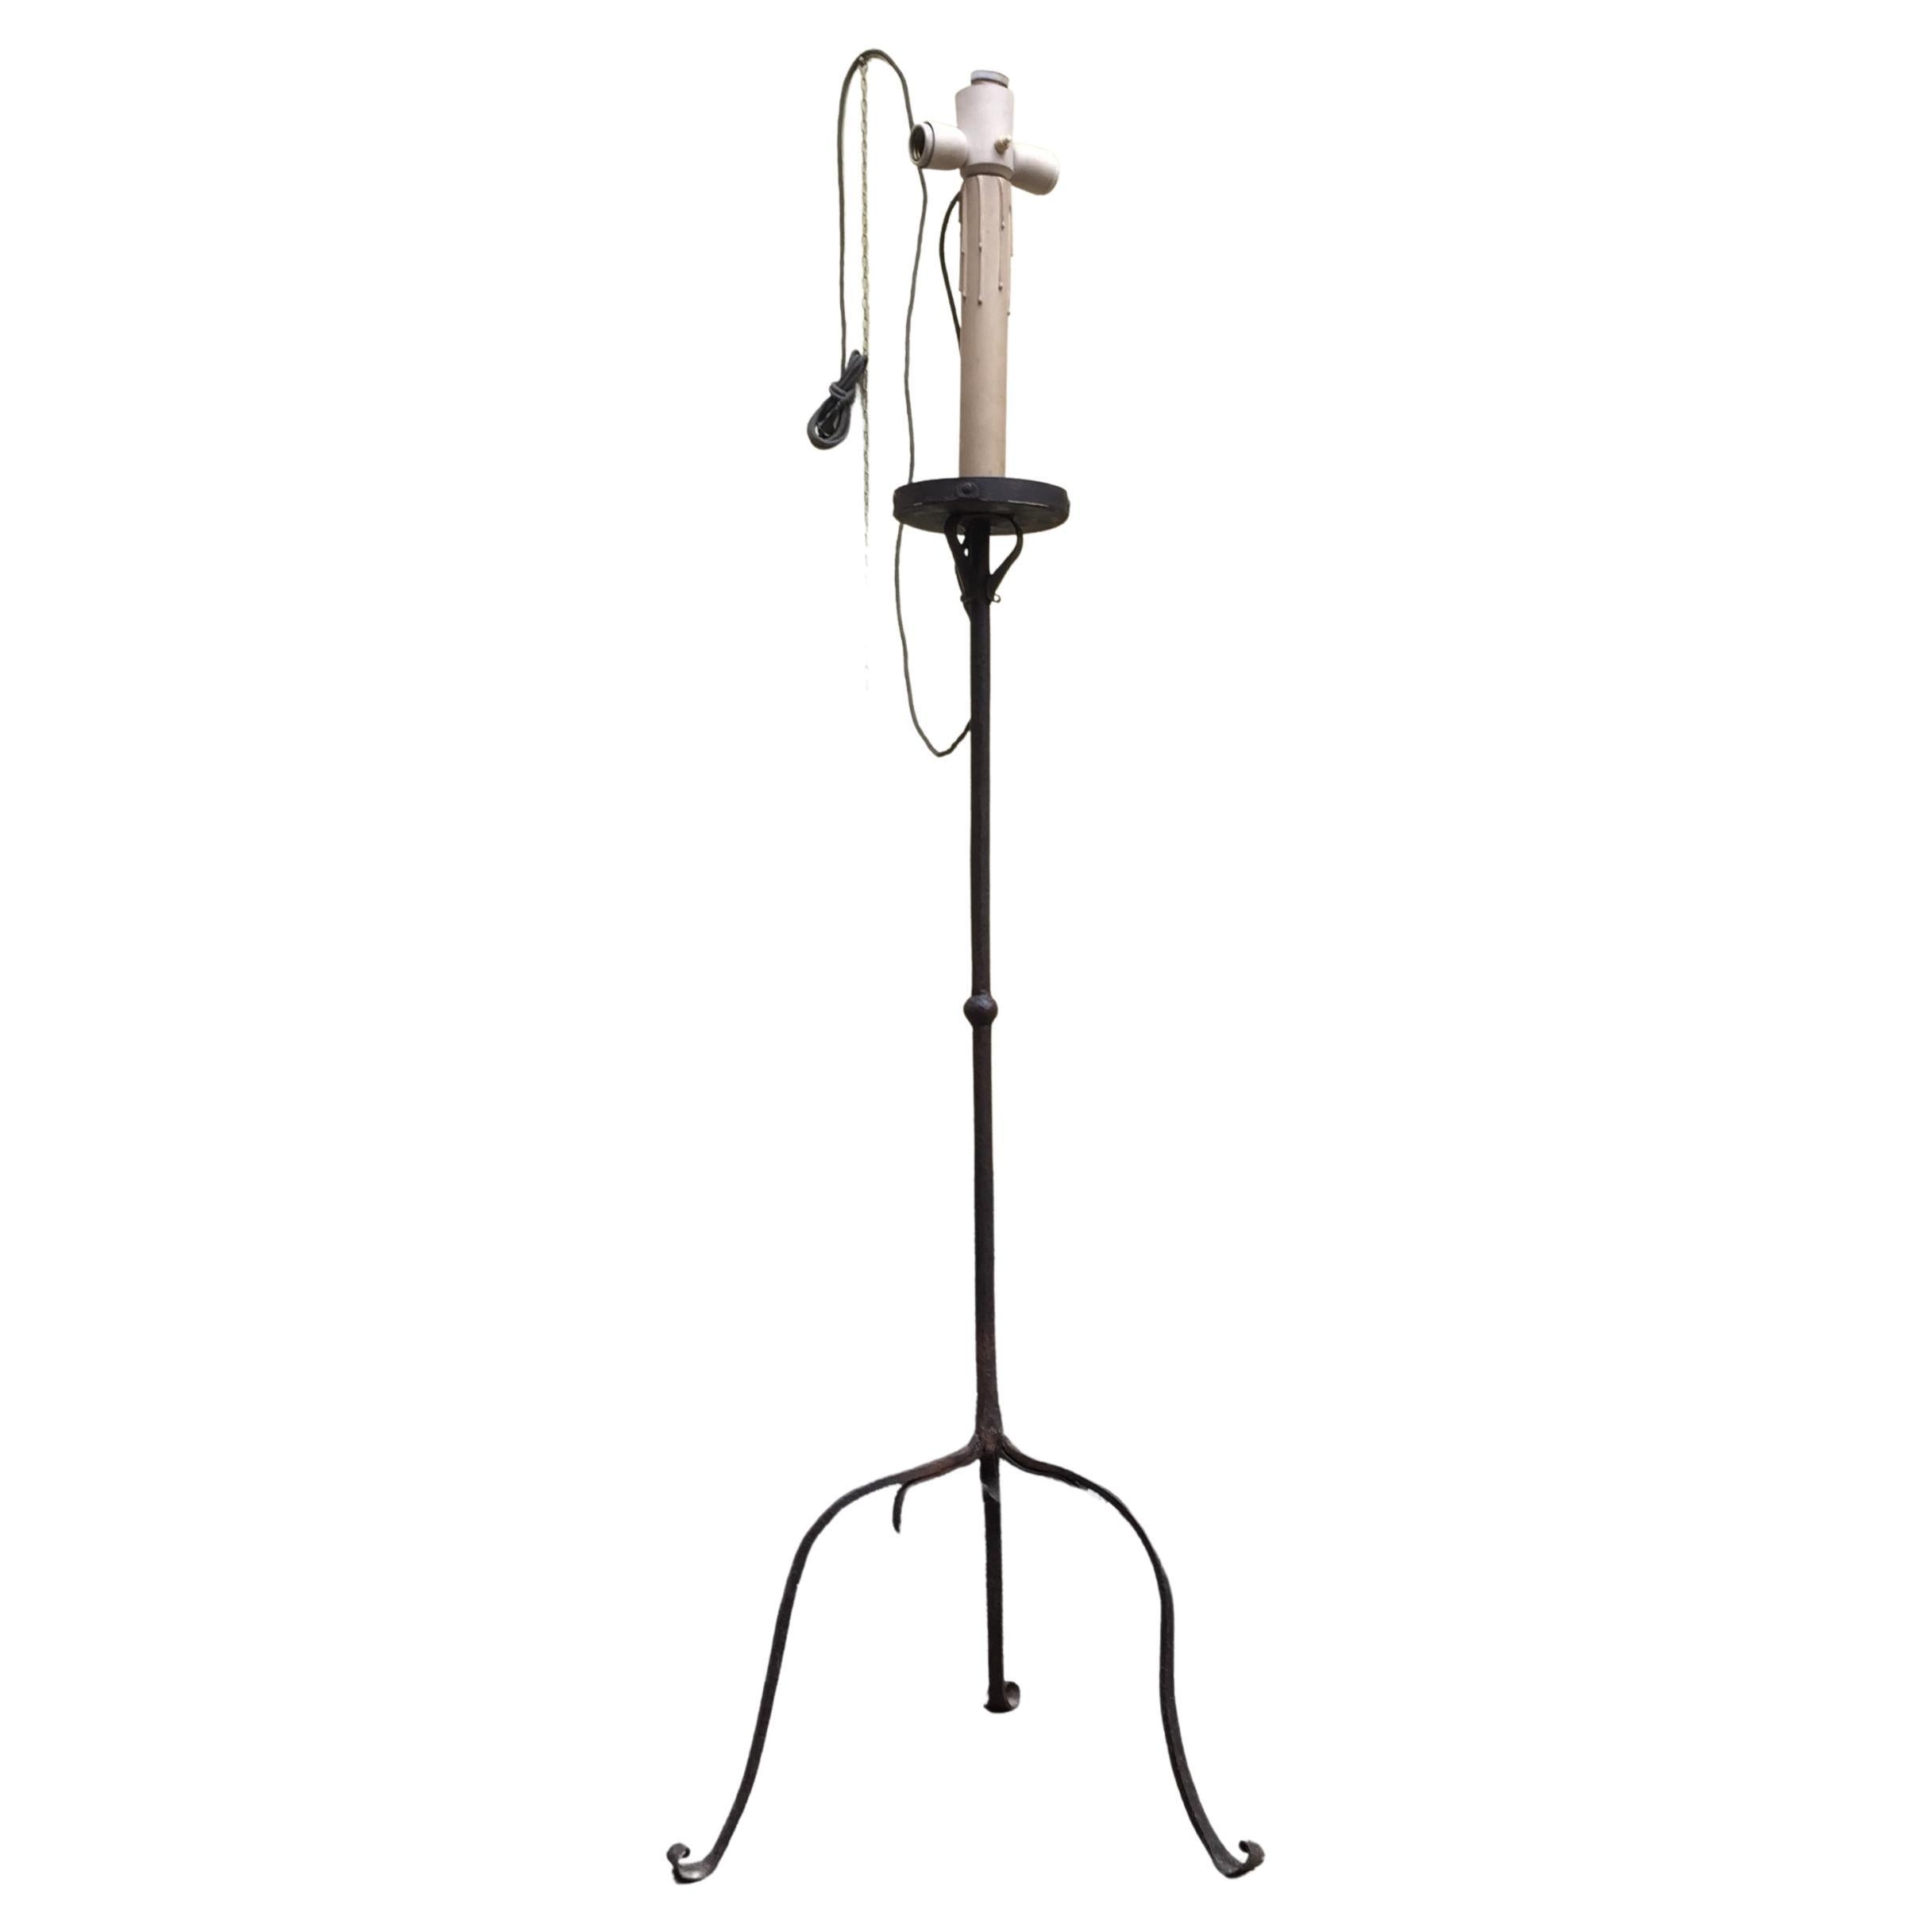 Antique Italian iron floor lamp, a linear circular wrought iron torchere dating back to the early 19th century. 
Striking elegant classical form and a lovely original patina, a knopped turned stem topped by a round pan, standing on a tripod base